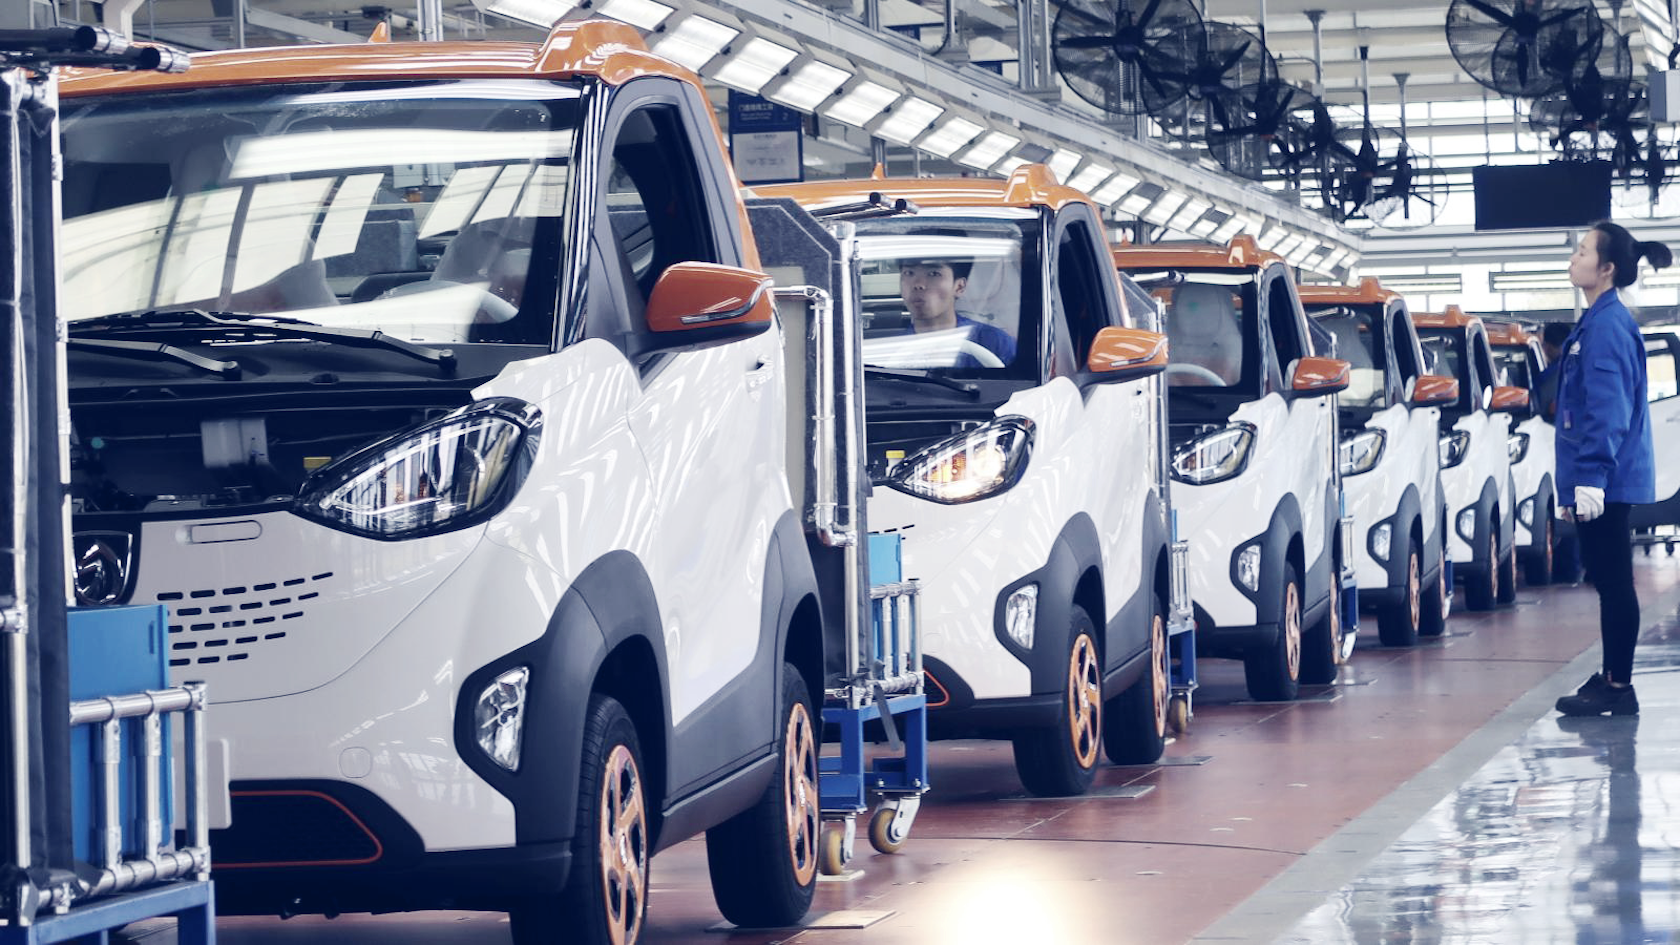 Market update: China to dominate electric vehicle market for years to come